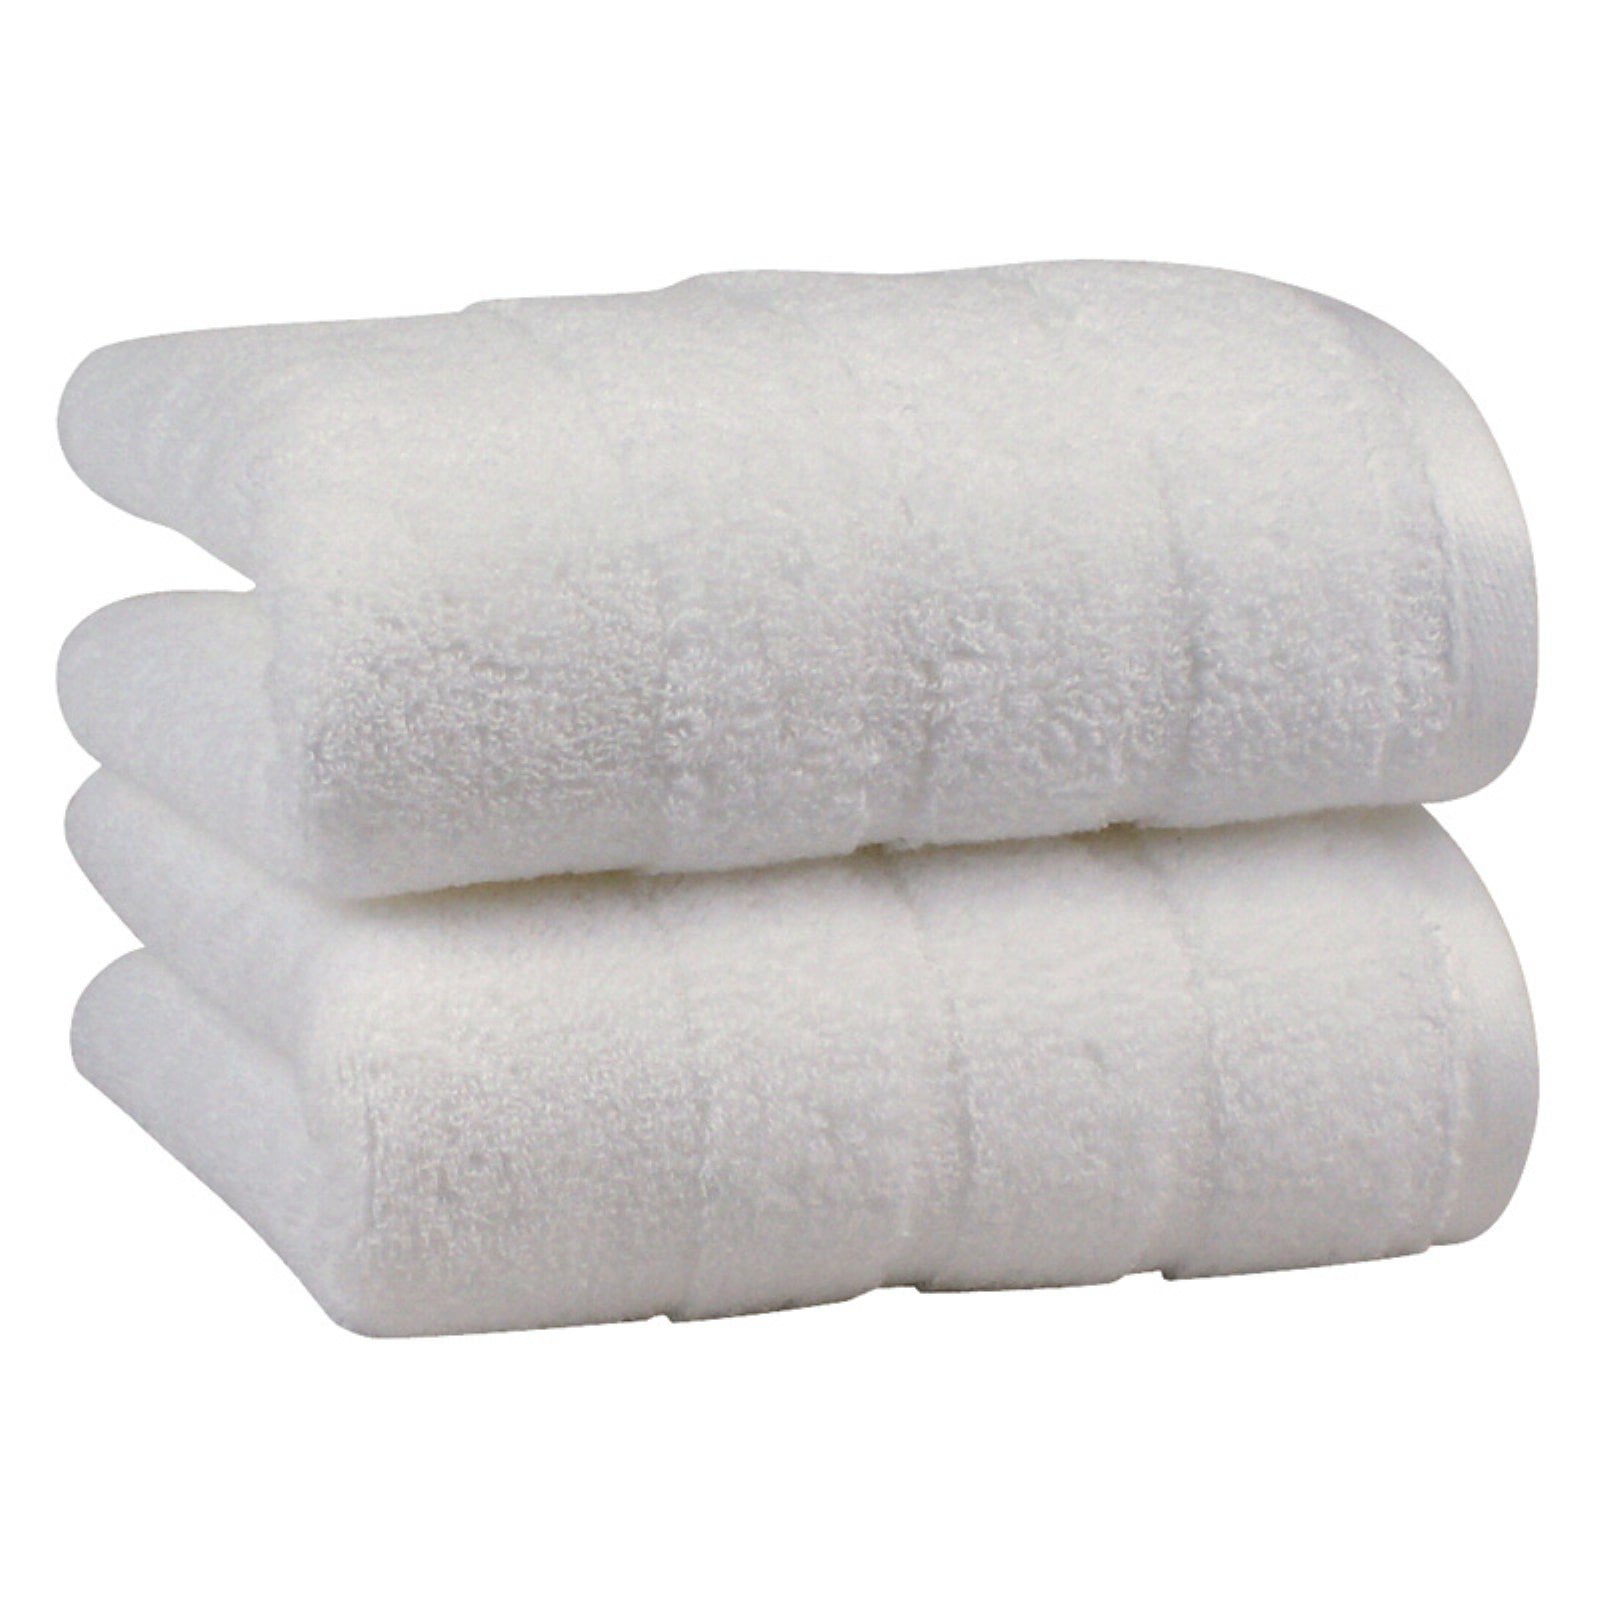 1888 Mills Whole Solutions Wash Cloths, 13 x 13, White, Pack of 300